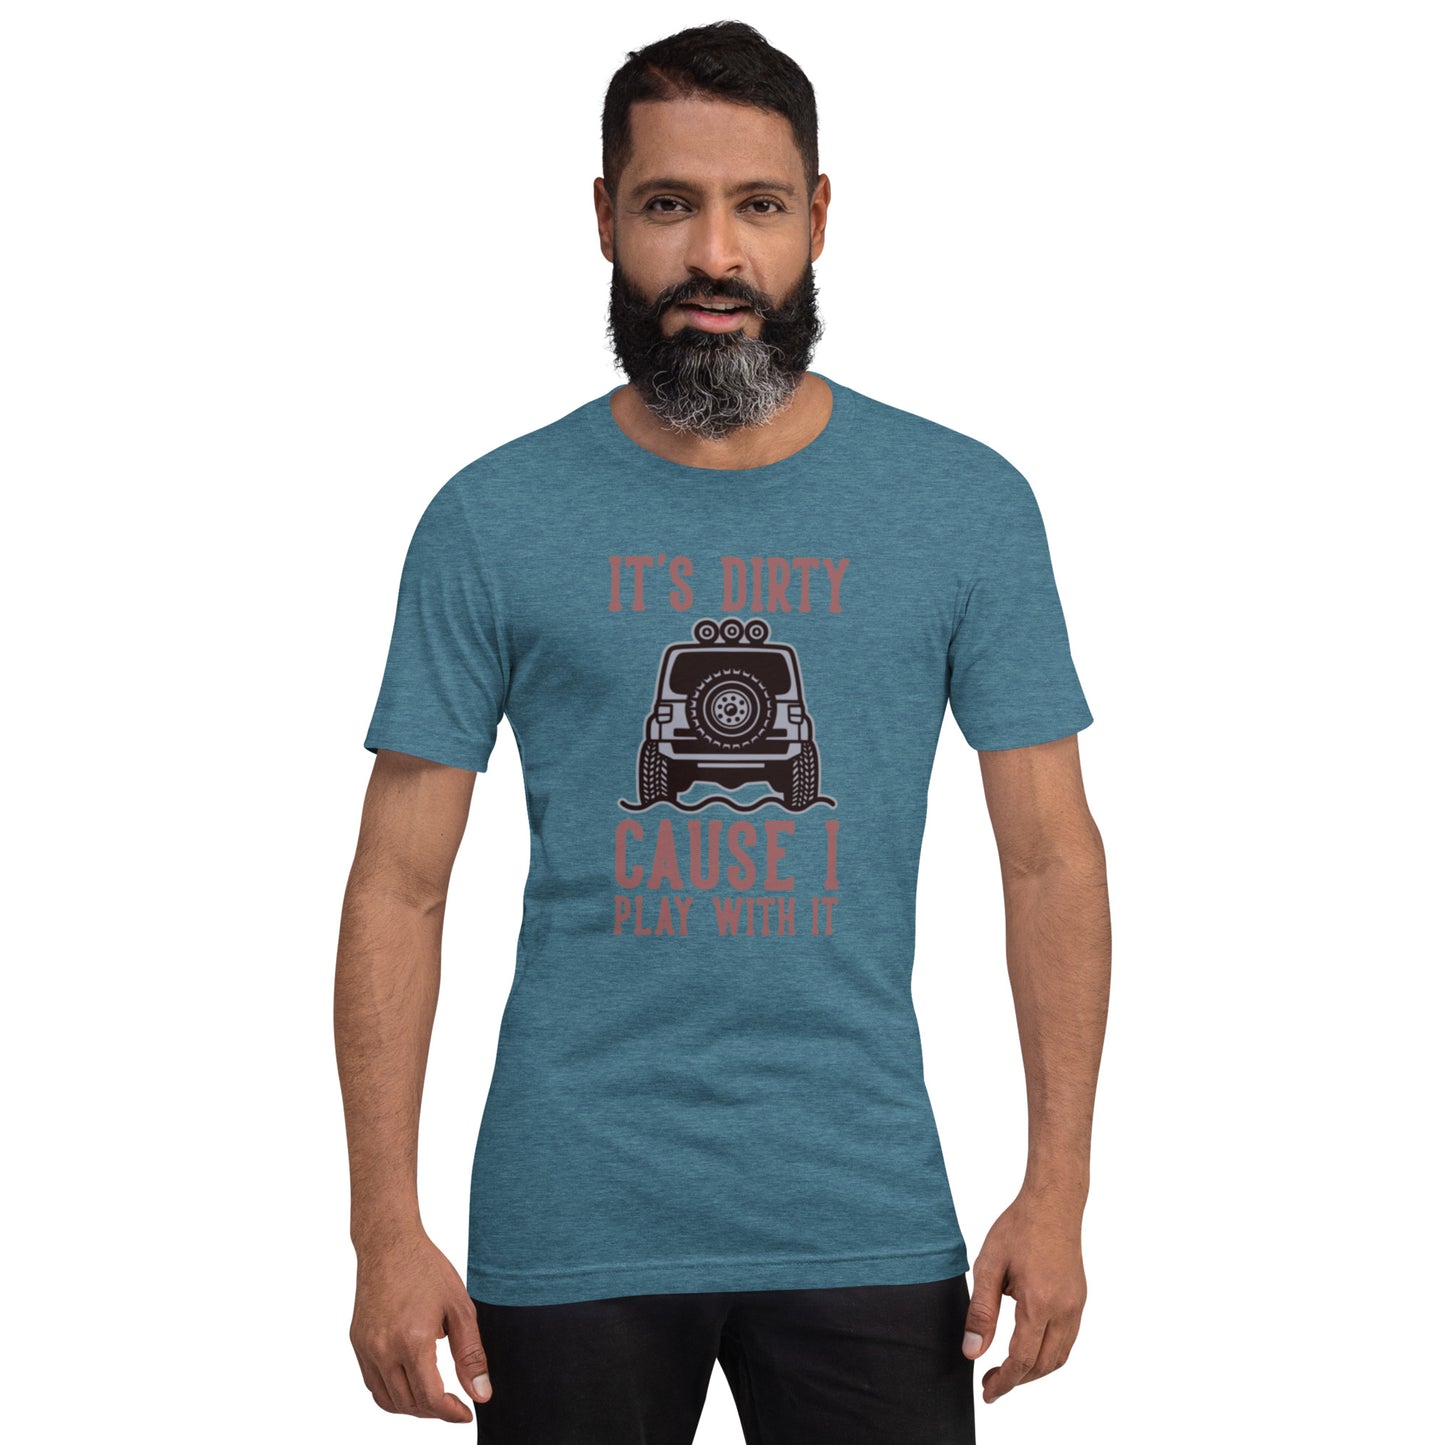 It's Dirty Cause I Play With It Unisex t-shirt